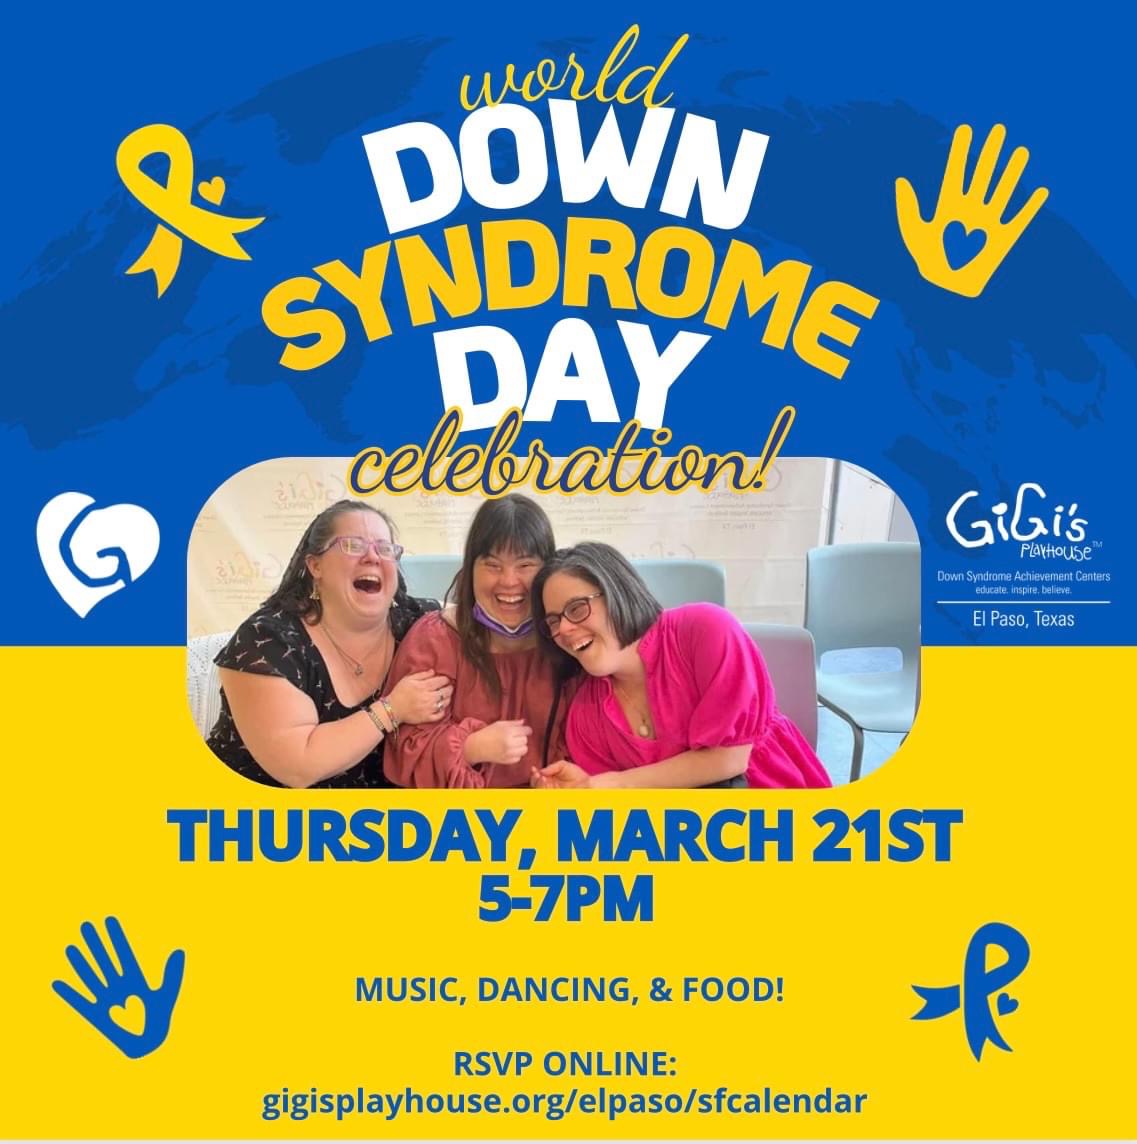 World Down Syndrome Day is commemorated annually on March 21. This date was chosen to symbolize the distinctive triplication of the 21st chromosome. You can raise awareness and acceptance by wearing CRAZY socks! Also, join us at Gigi's tomorrow from 5-7PM.